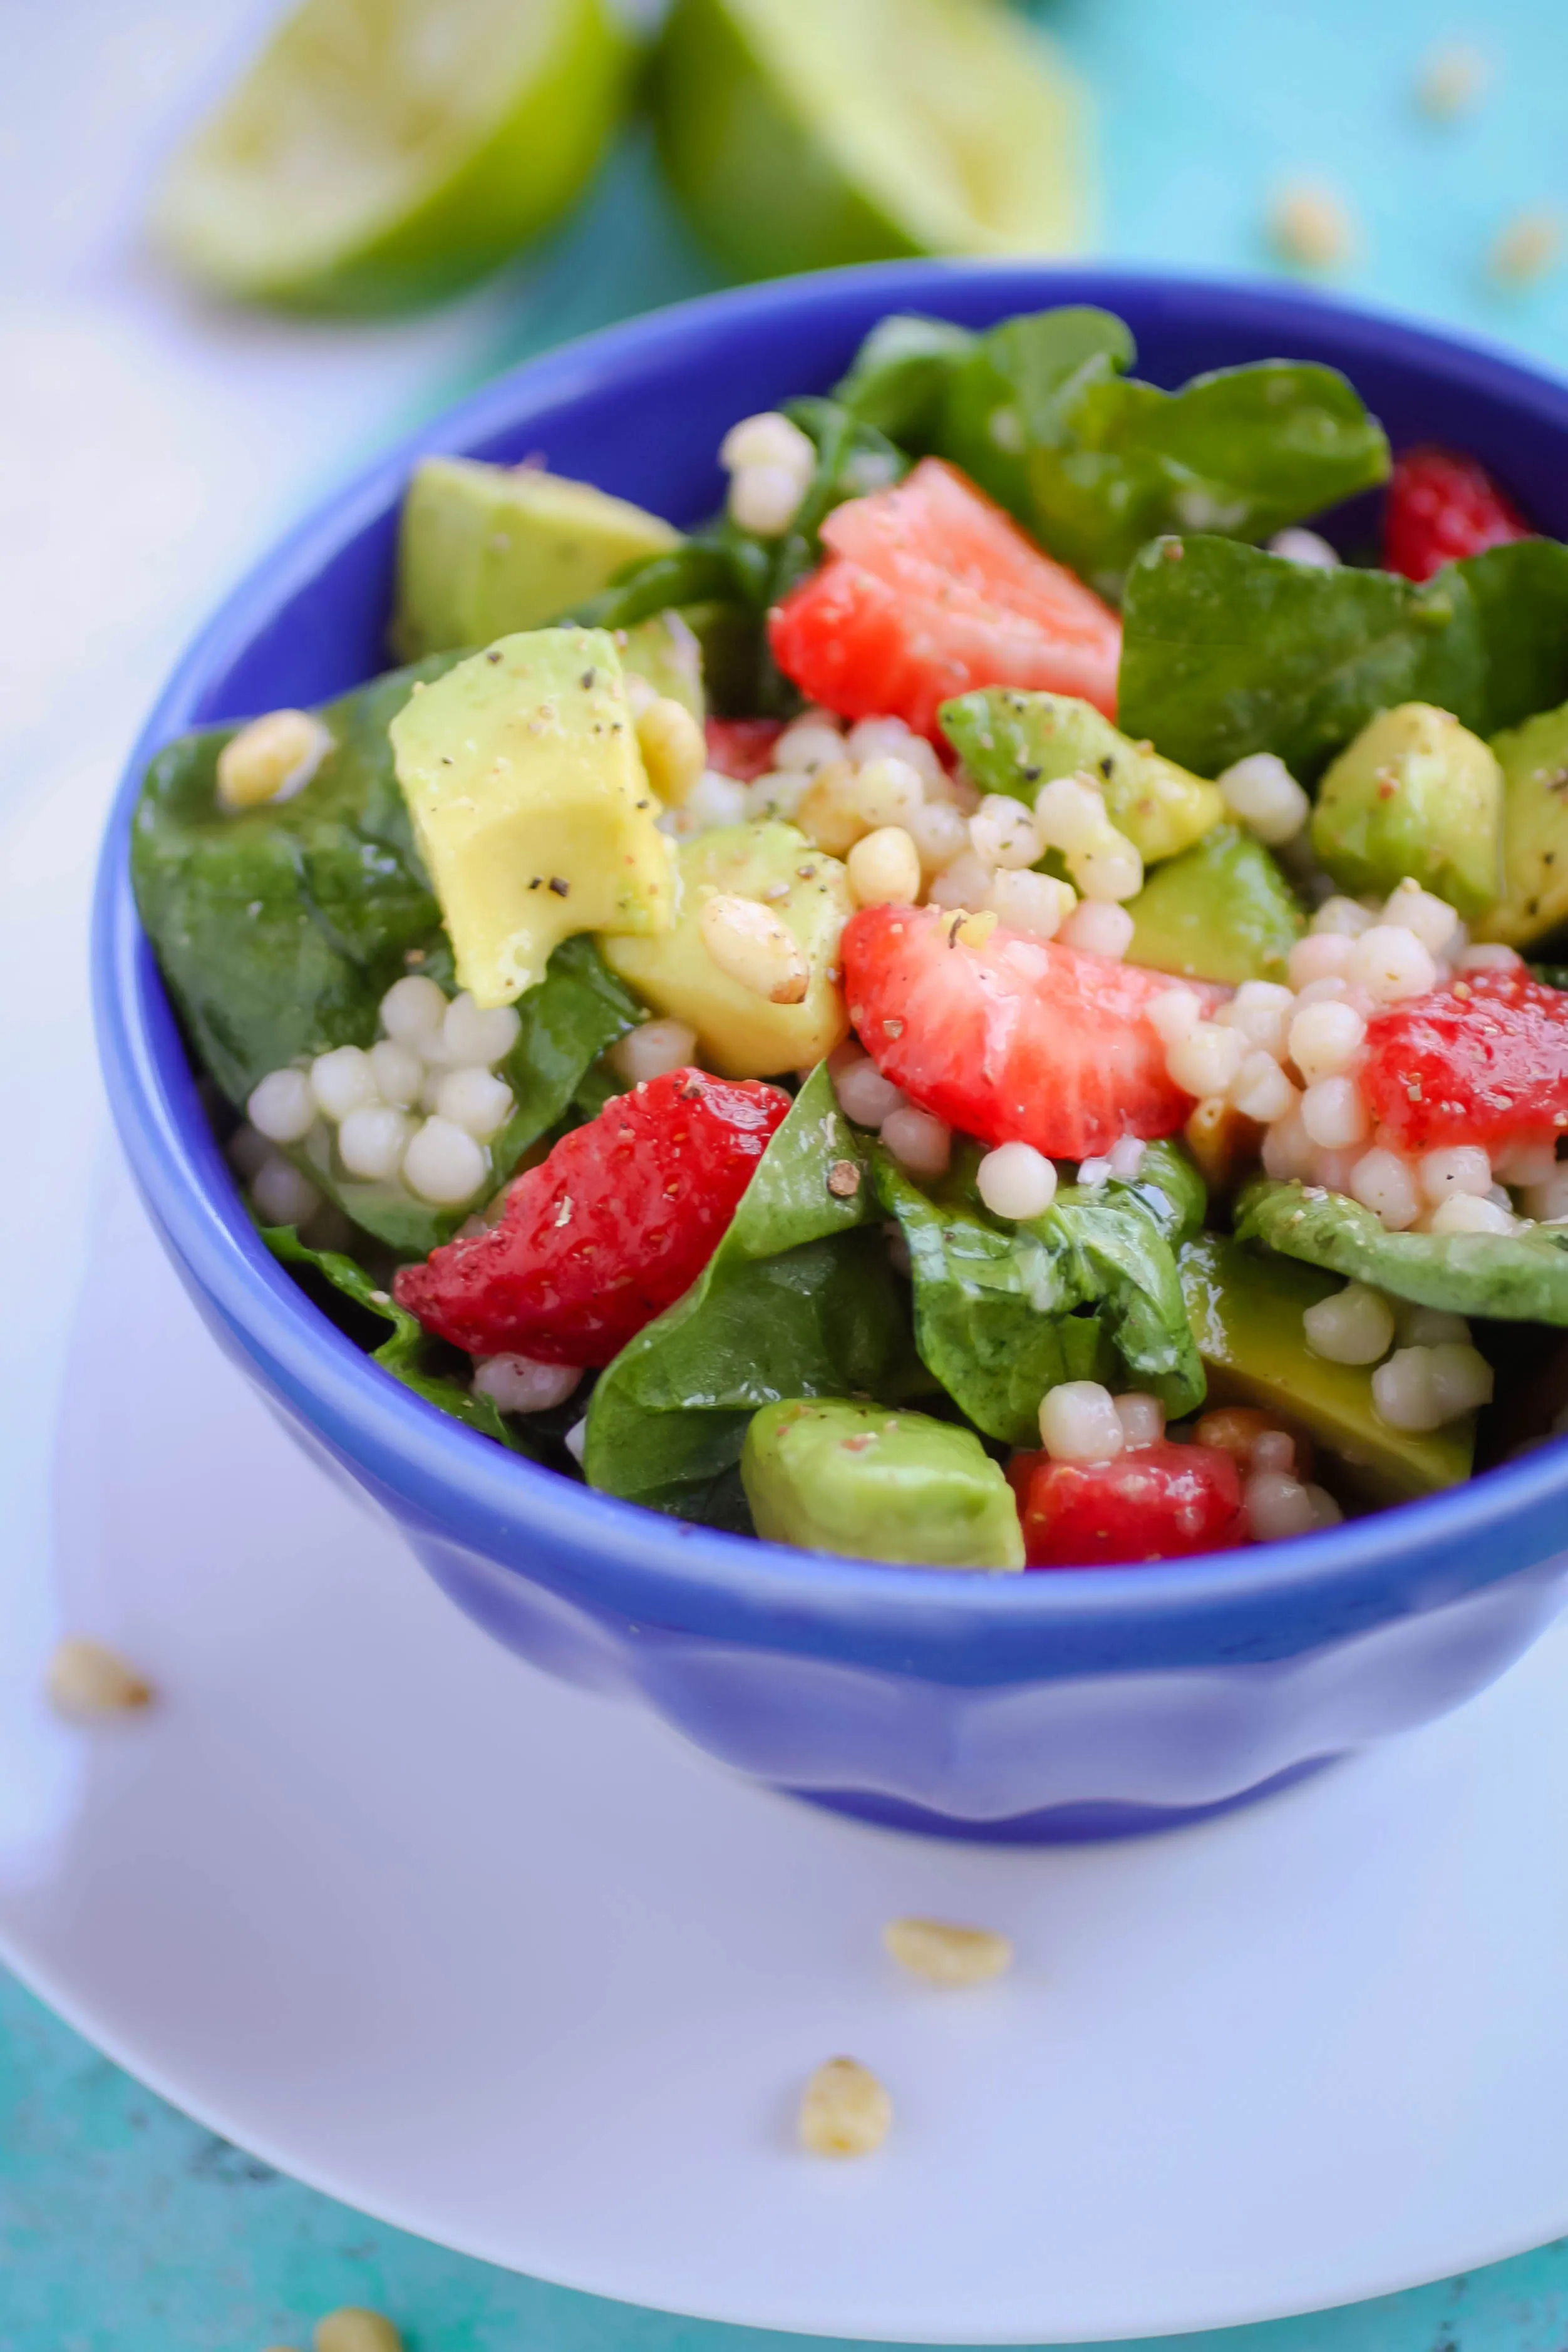 Spinach and Couscous Salad with Strawberries, Avocado & Honey-Lime Dressing is a wonderful salad for the summer. Spinach and Couscous Salad with Strawberries, Avocado & Honey-Lime Dressing is a salad you need to toss together today!